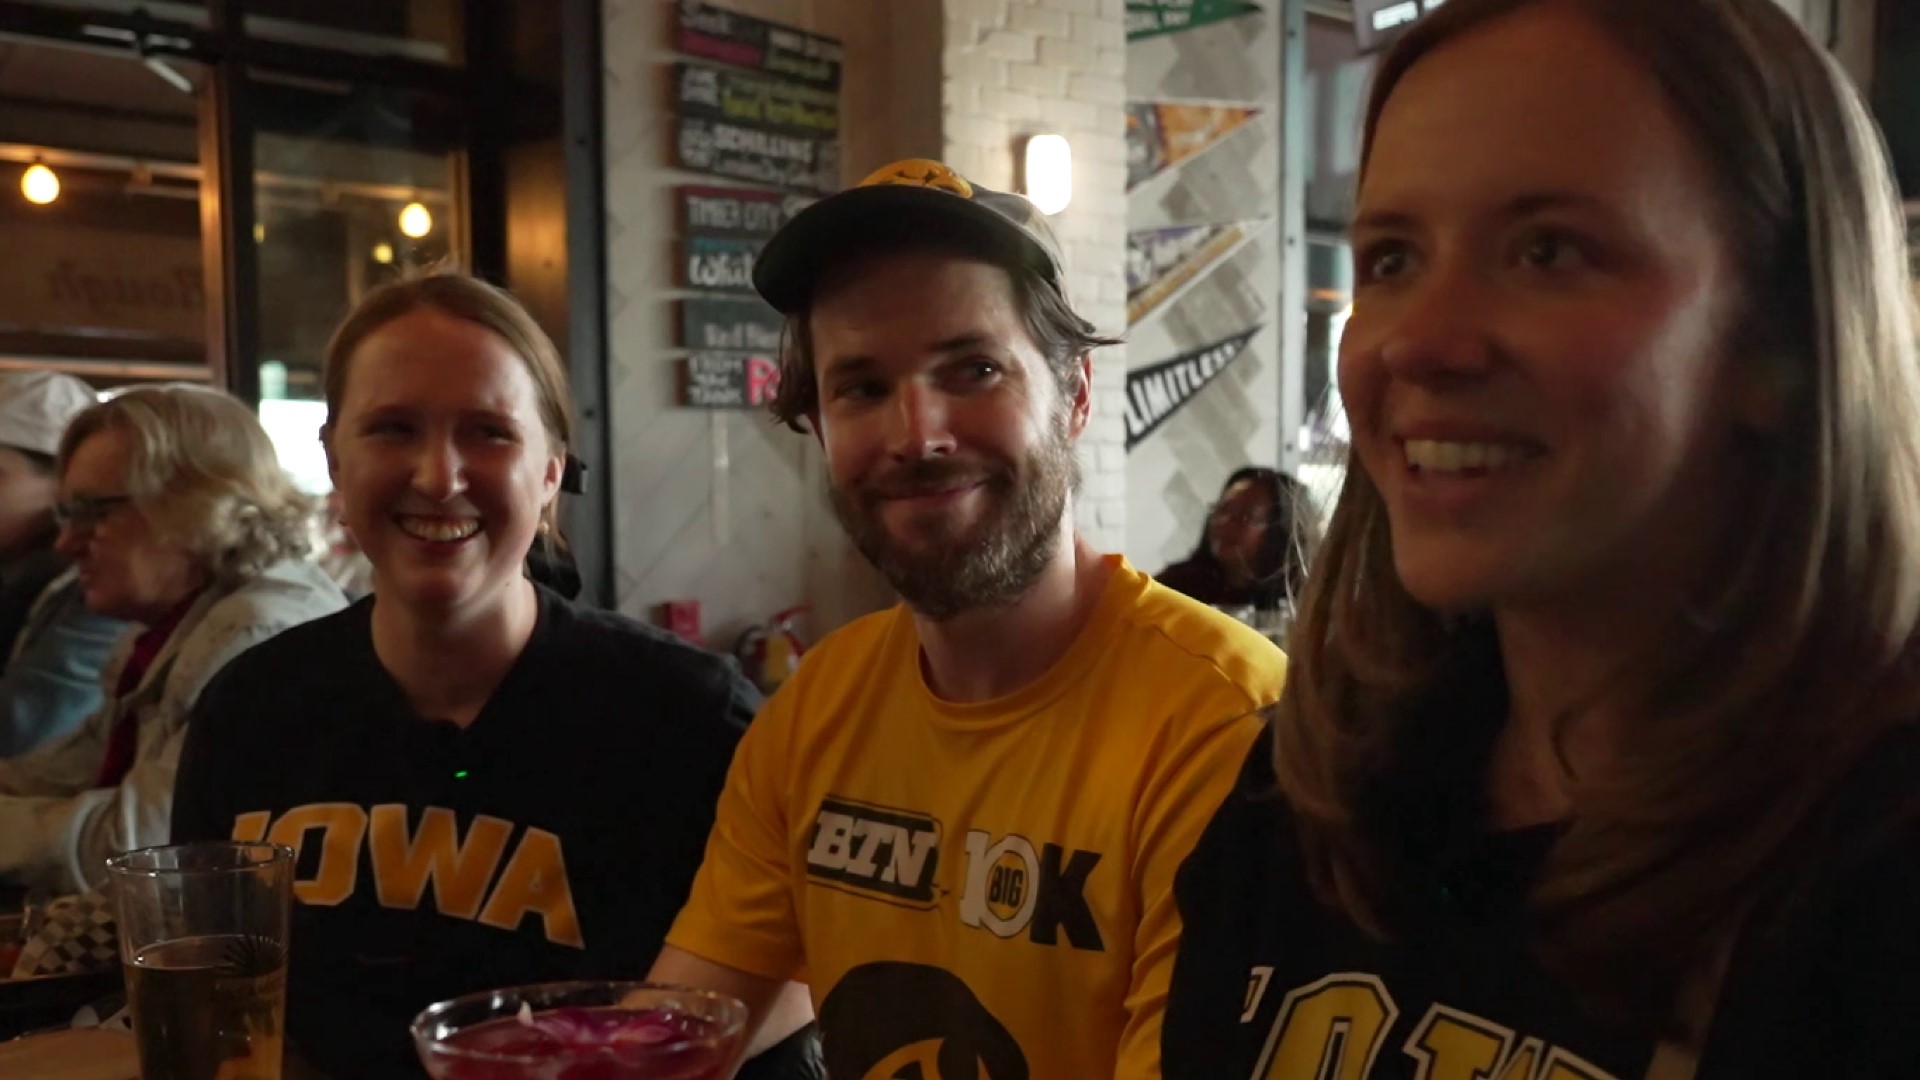 Rough and Tumble Pub, a bar dedicated to women’s sports, was packed Friday with fans watching the NCAA 2024 Women’s Final Four.